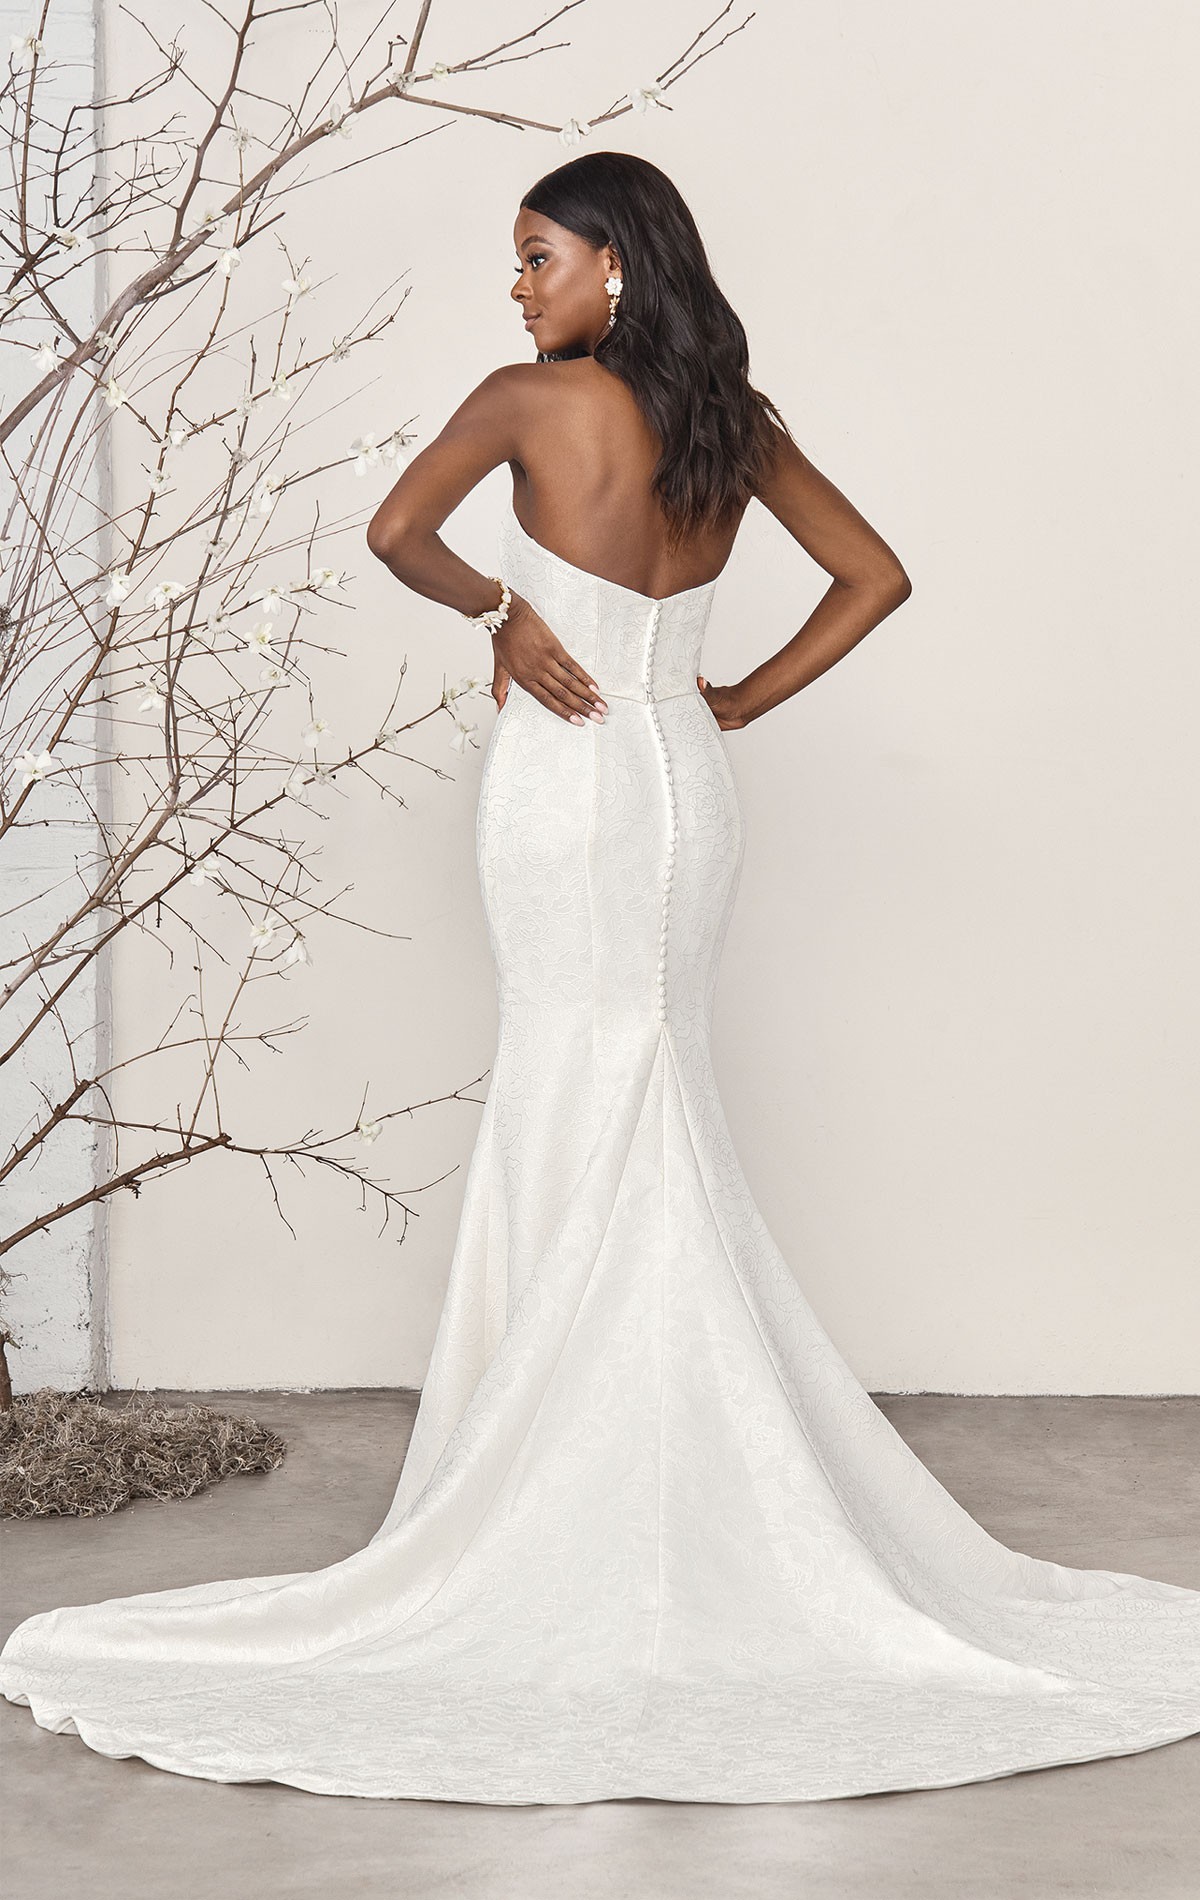 44384 - Viola - Justin Alexander Sincerity Bridal 44384, Simple fitted wedding dress with strapless - City wedding style at Blessings of Brighton, Loyal parade, Mill Rise, Westdene, Brighton BN1 5GG T: 01273 505766 E:info@blessingsbridal;.co.uk